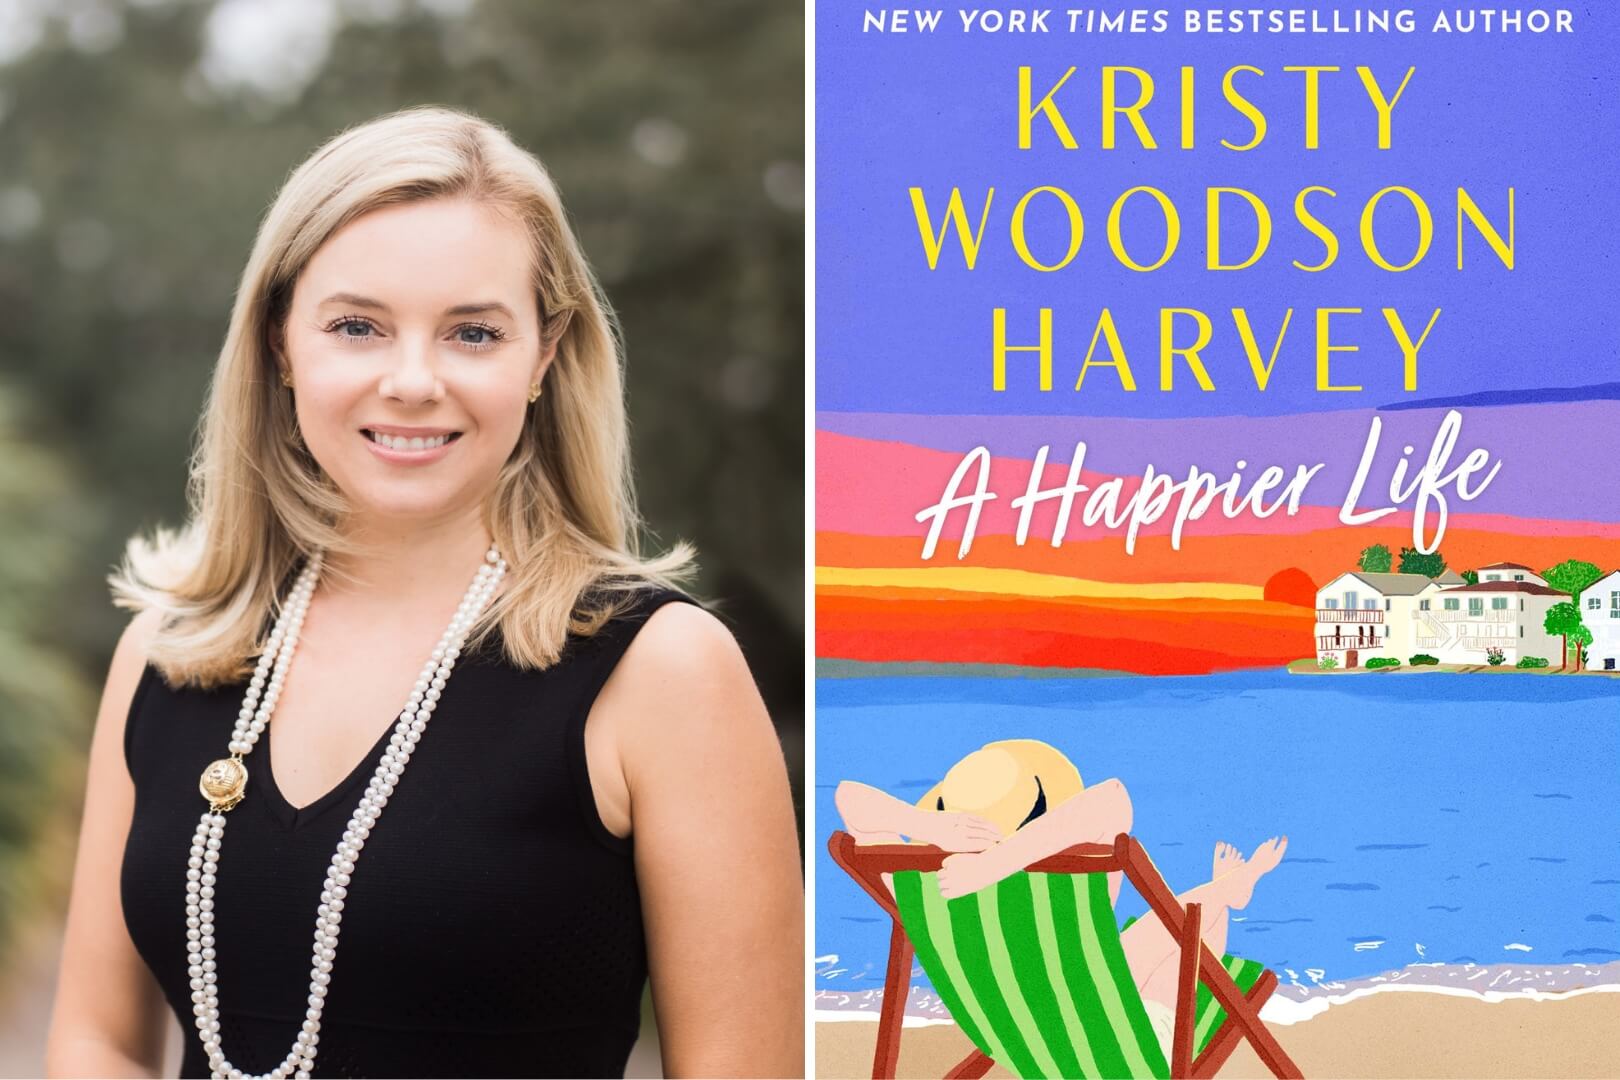 Q&A with Kristy Woodson Harvey, Author of A Happier Life